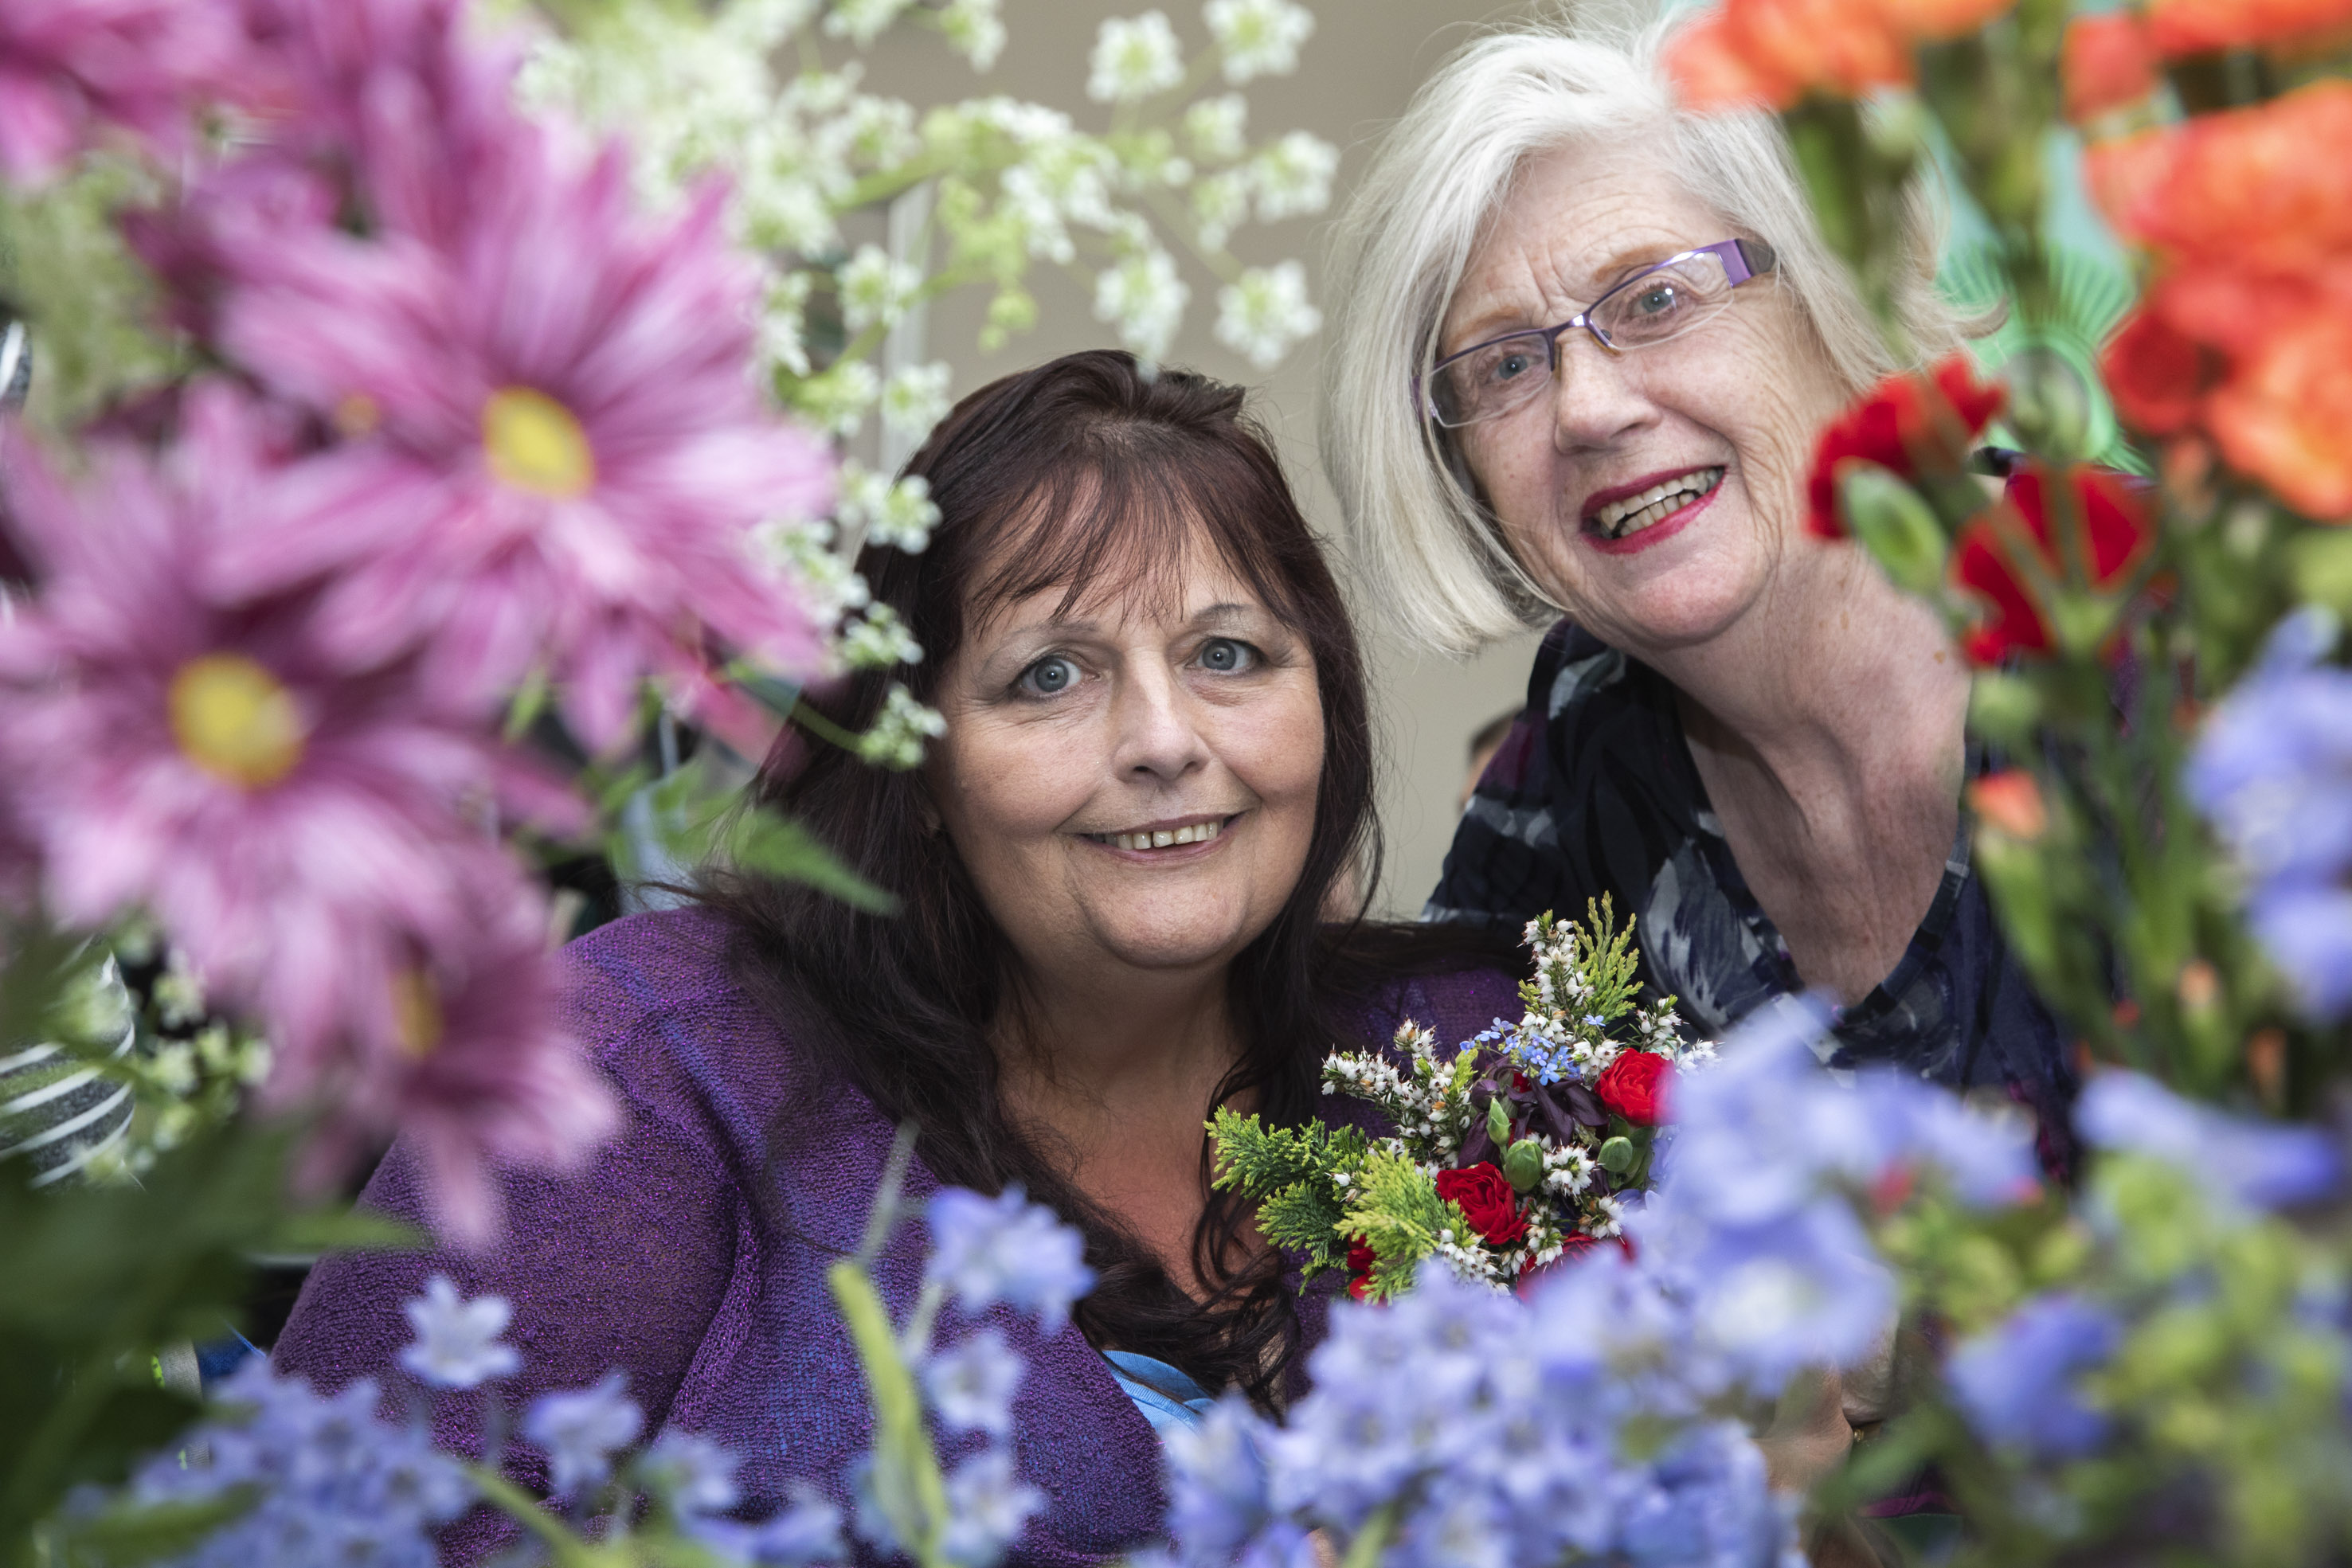 Royal flower power at care homes